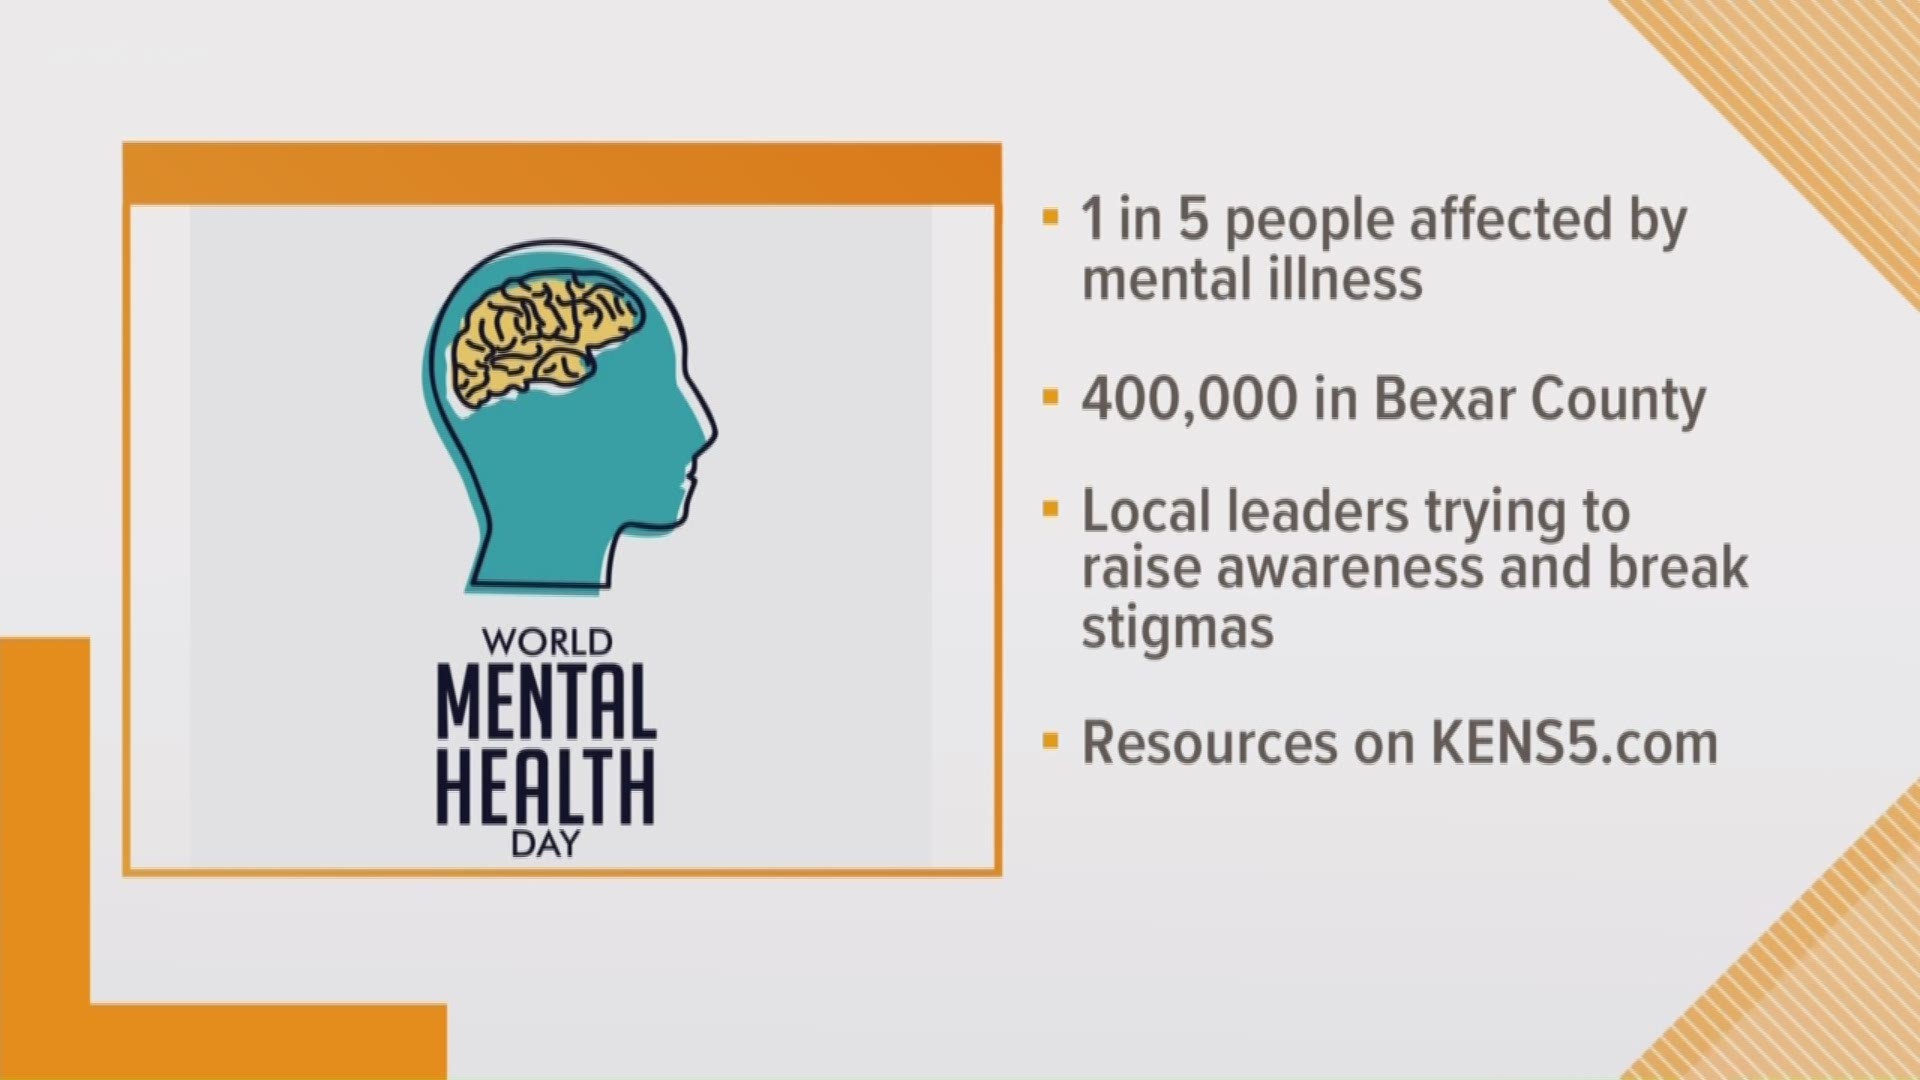 More than 400,000 people in Bexar County are affected by mental illness. The Bexar County Department of Mental Health and the National Alliance on Mental Illness are holding a ceremony today at noon.